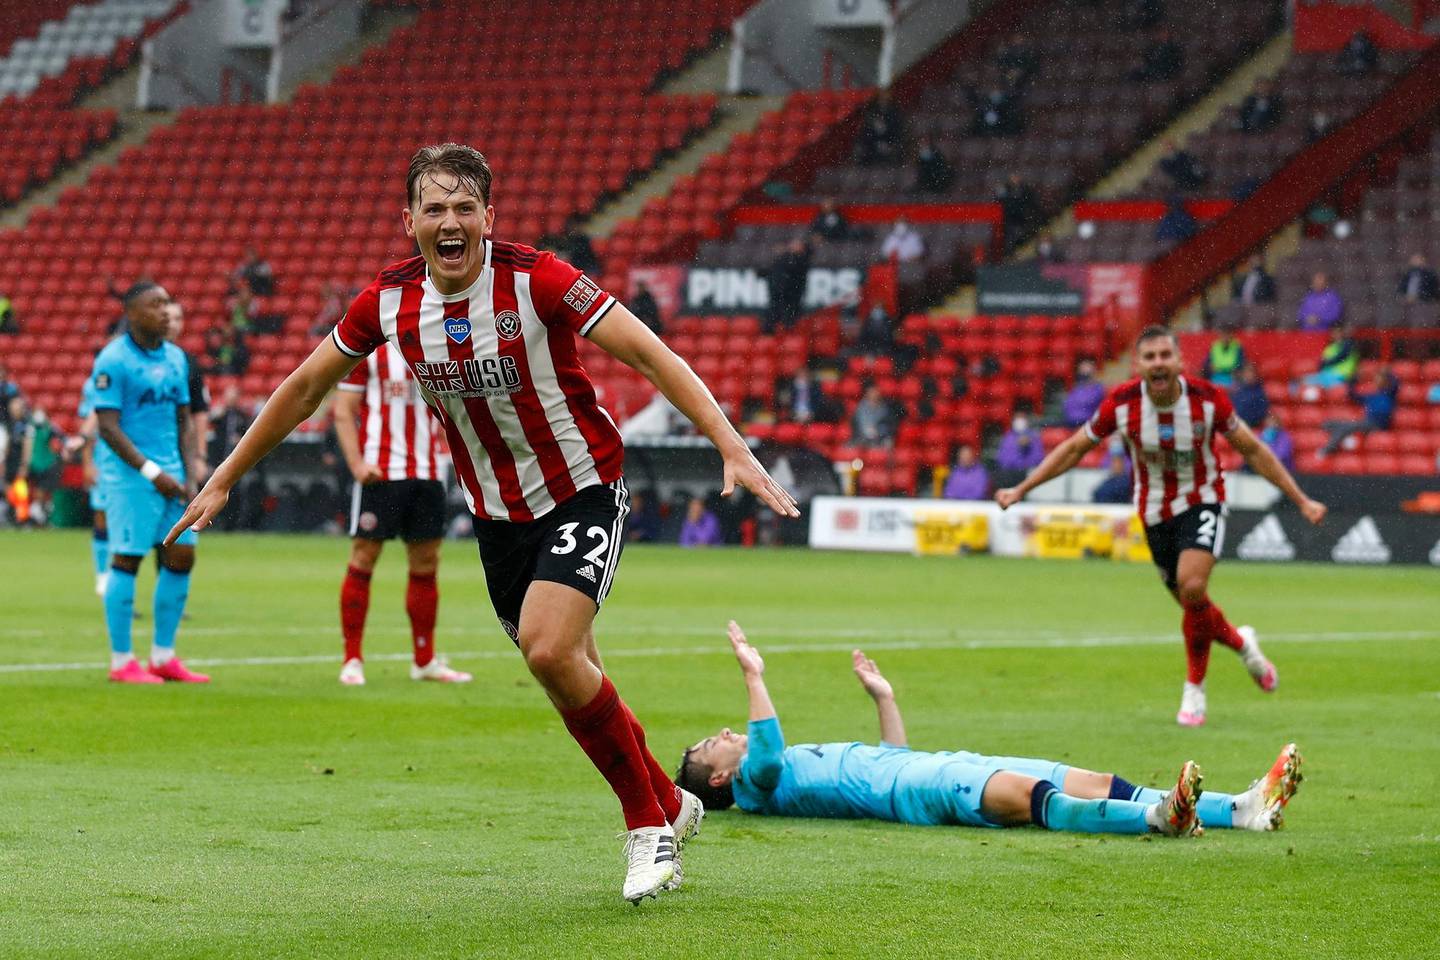 Sheffield United's Sander Berge celebrates after scoring the opening goal of his team during the English Premier League soccer match between Sheffield United and Tottenham Hotspur at Bramall Lane in Sheffield, Thursday, July 2, 2020. (Jason Cairnduff/Pool via AP)